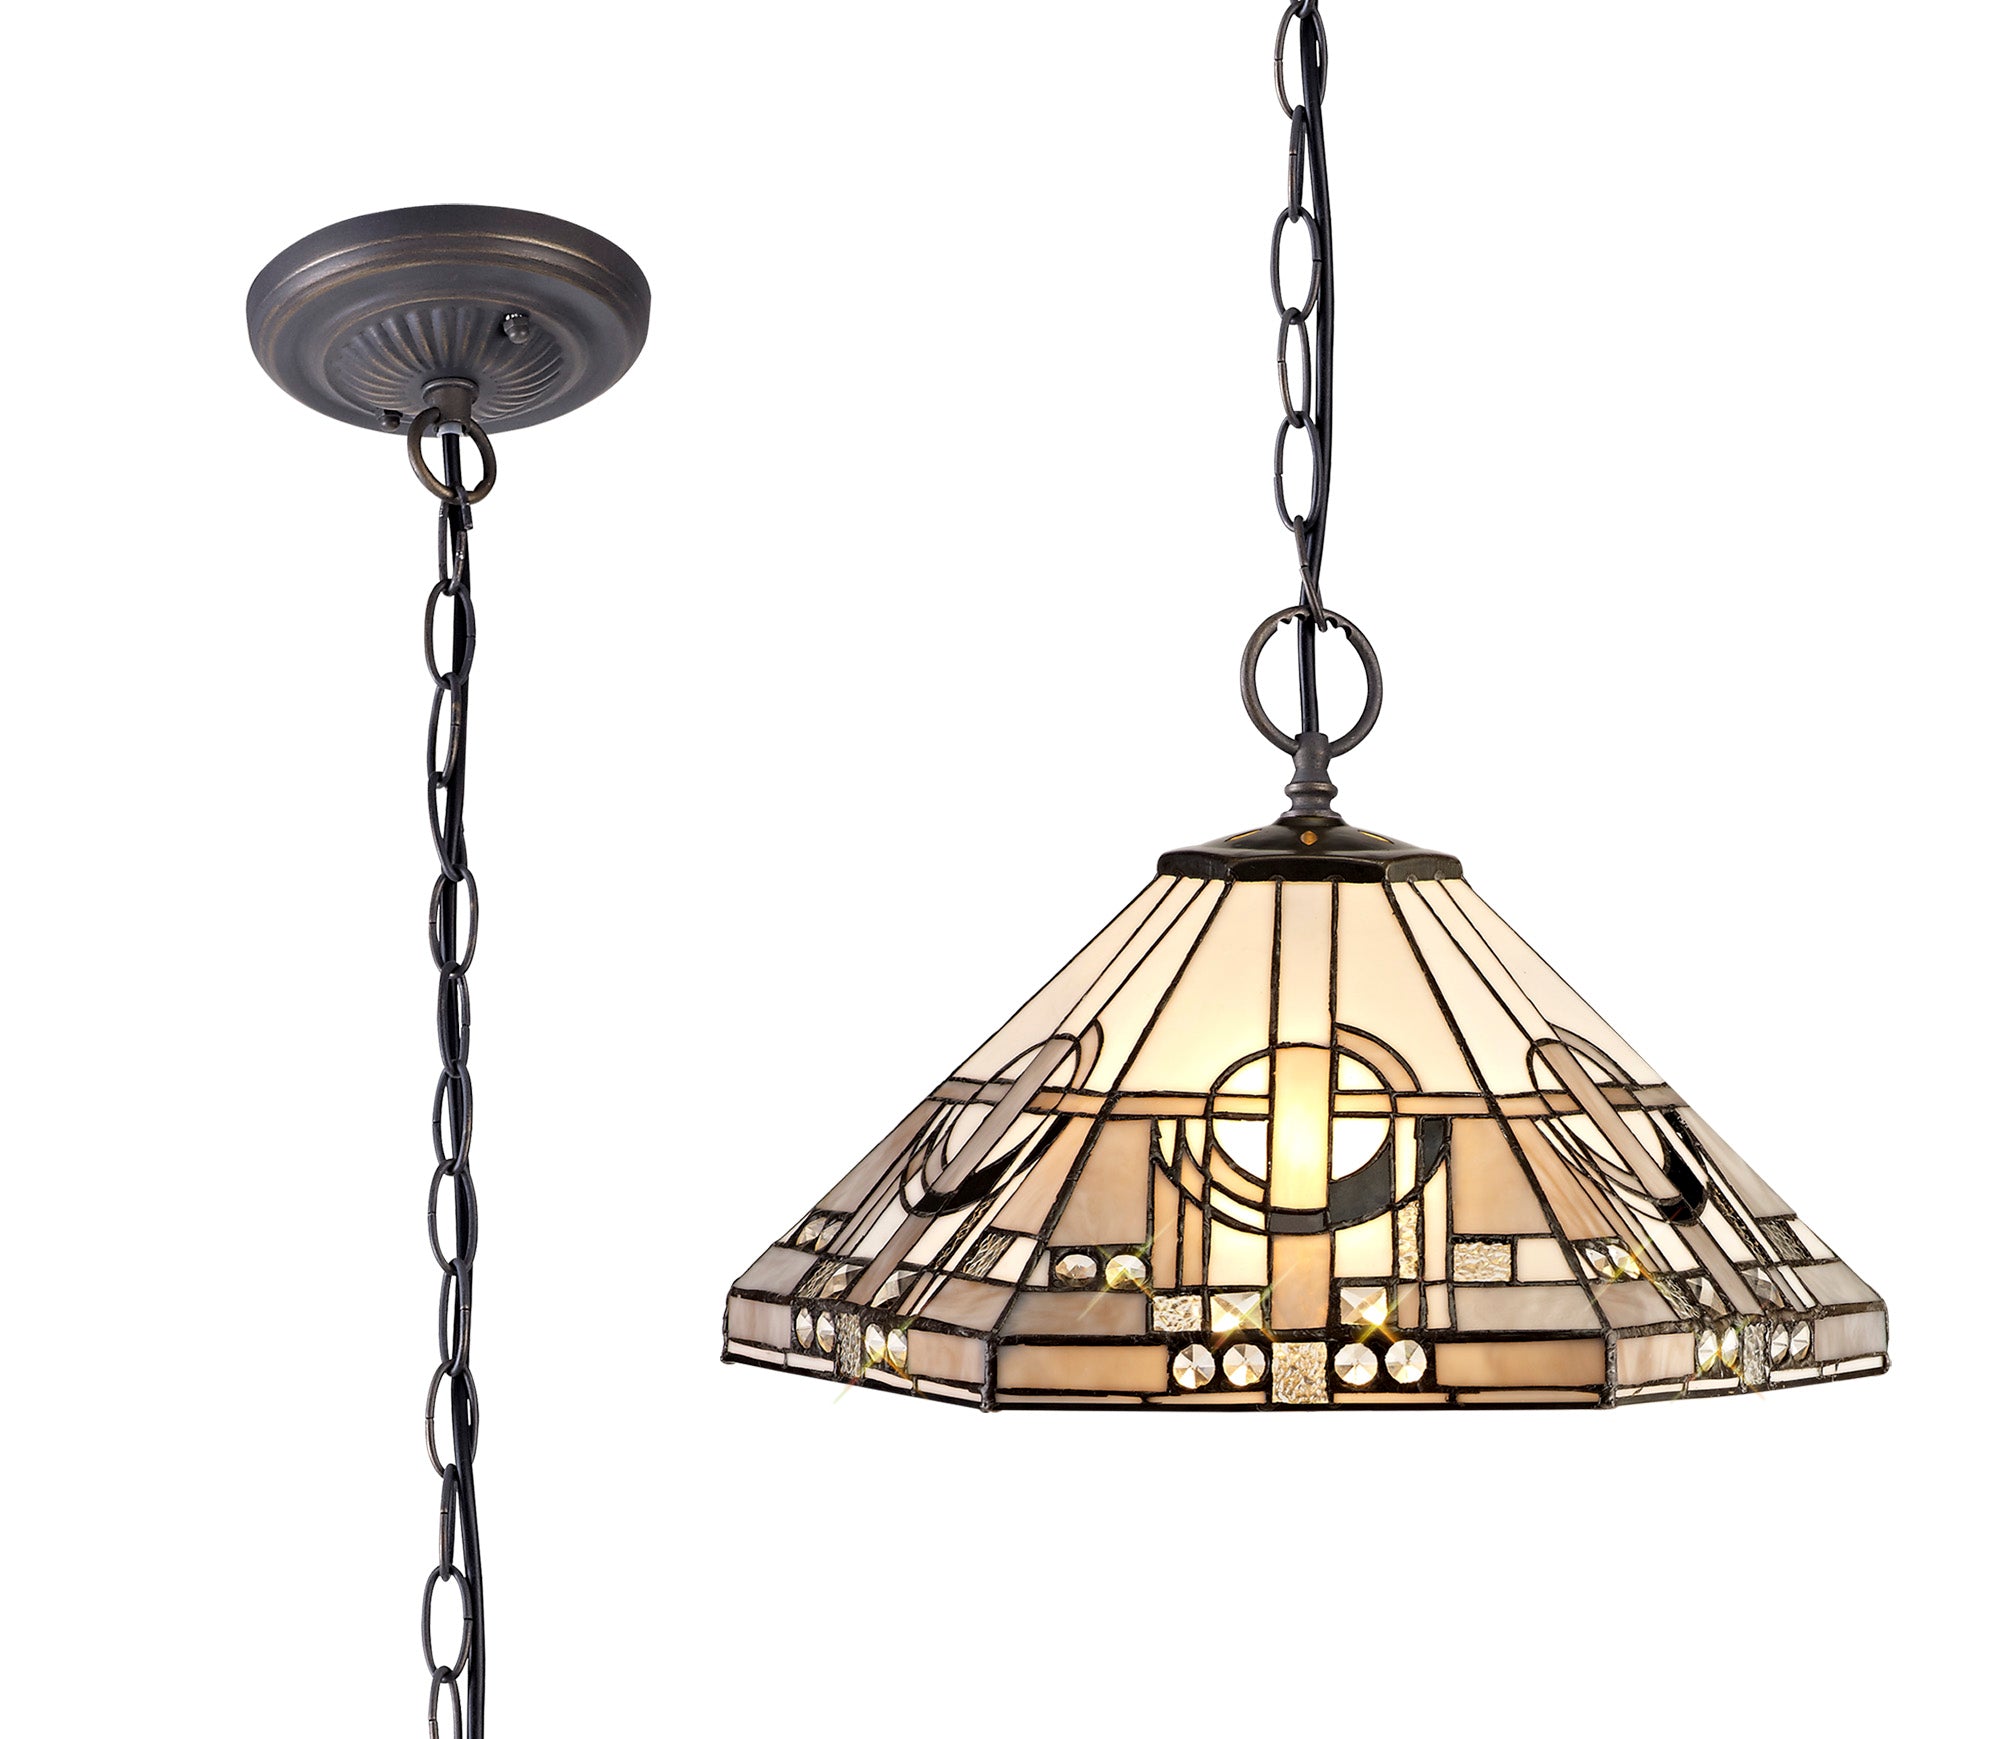 Atek 2 Light Downlighter Pendant E27 With 40cm Tiffany Shade, White/Grey/Black/Clear Crystal/Aged Antique Brass